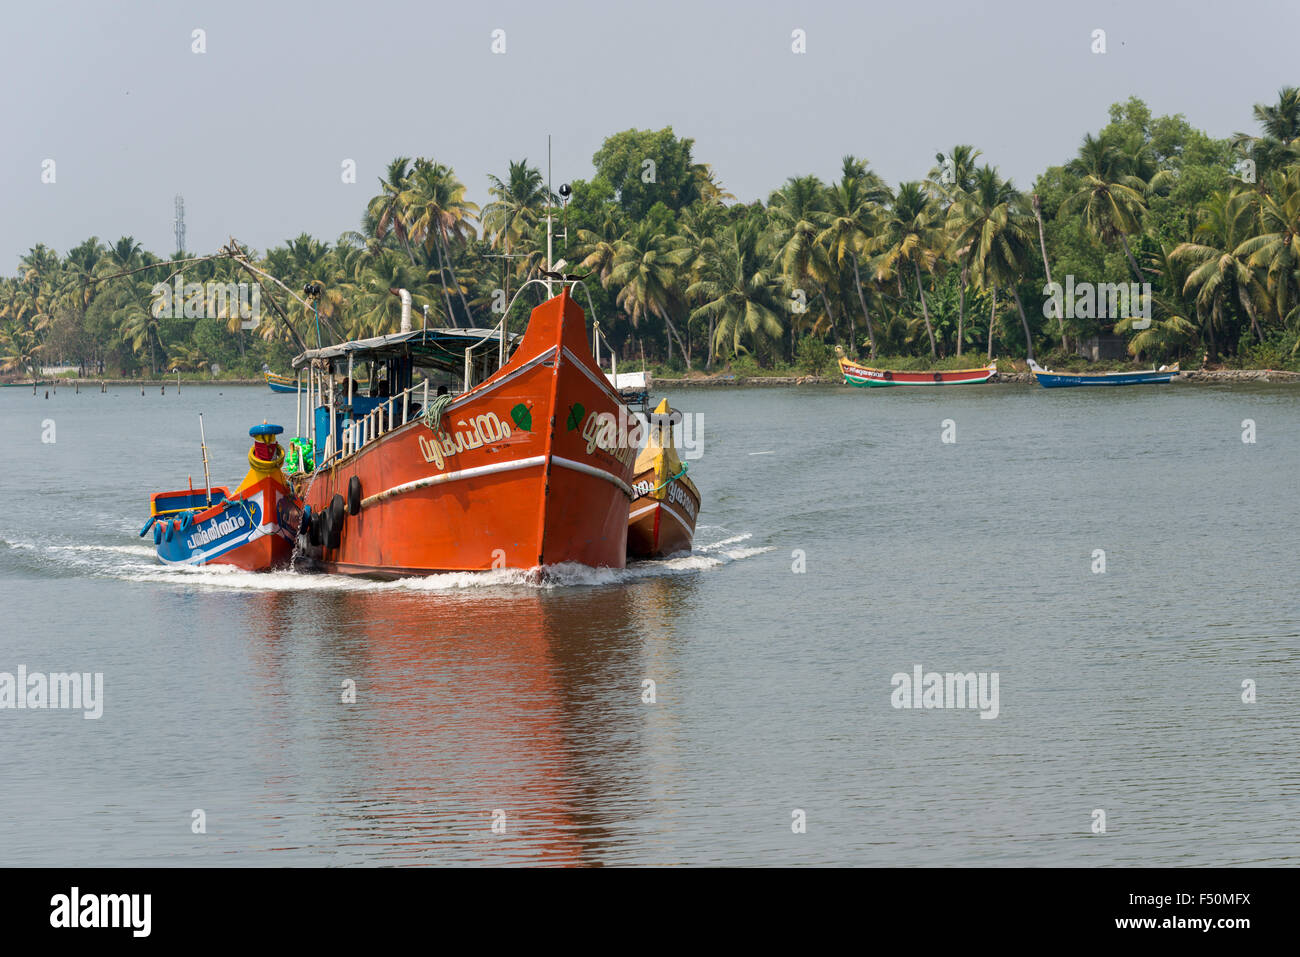 An orange fishing boat is cruising through the typical landscape with water canal and palmtrees in Keralas backwaters Stock Photo